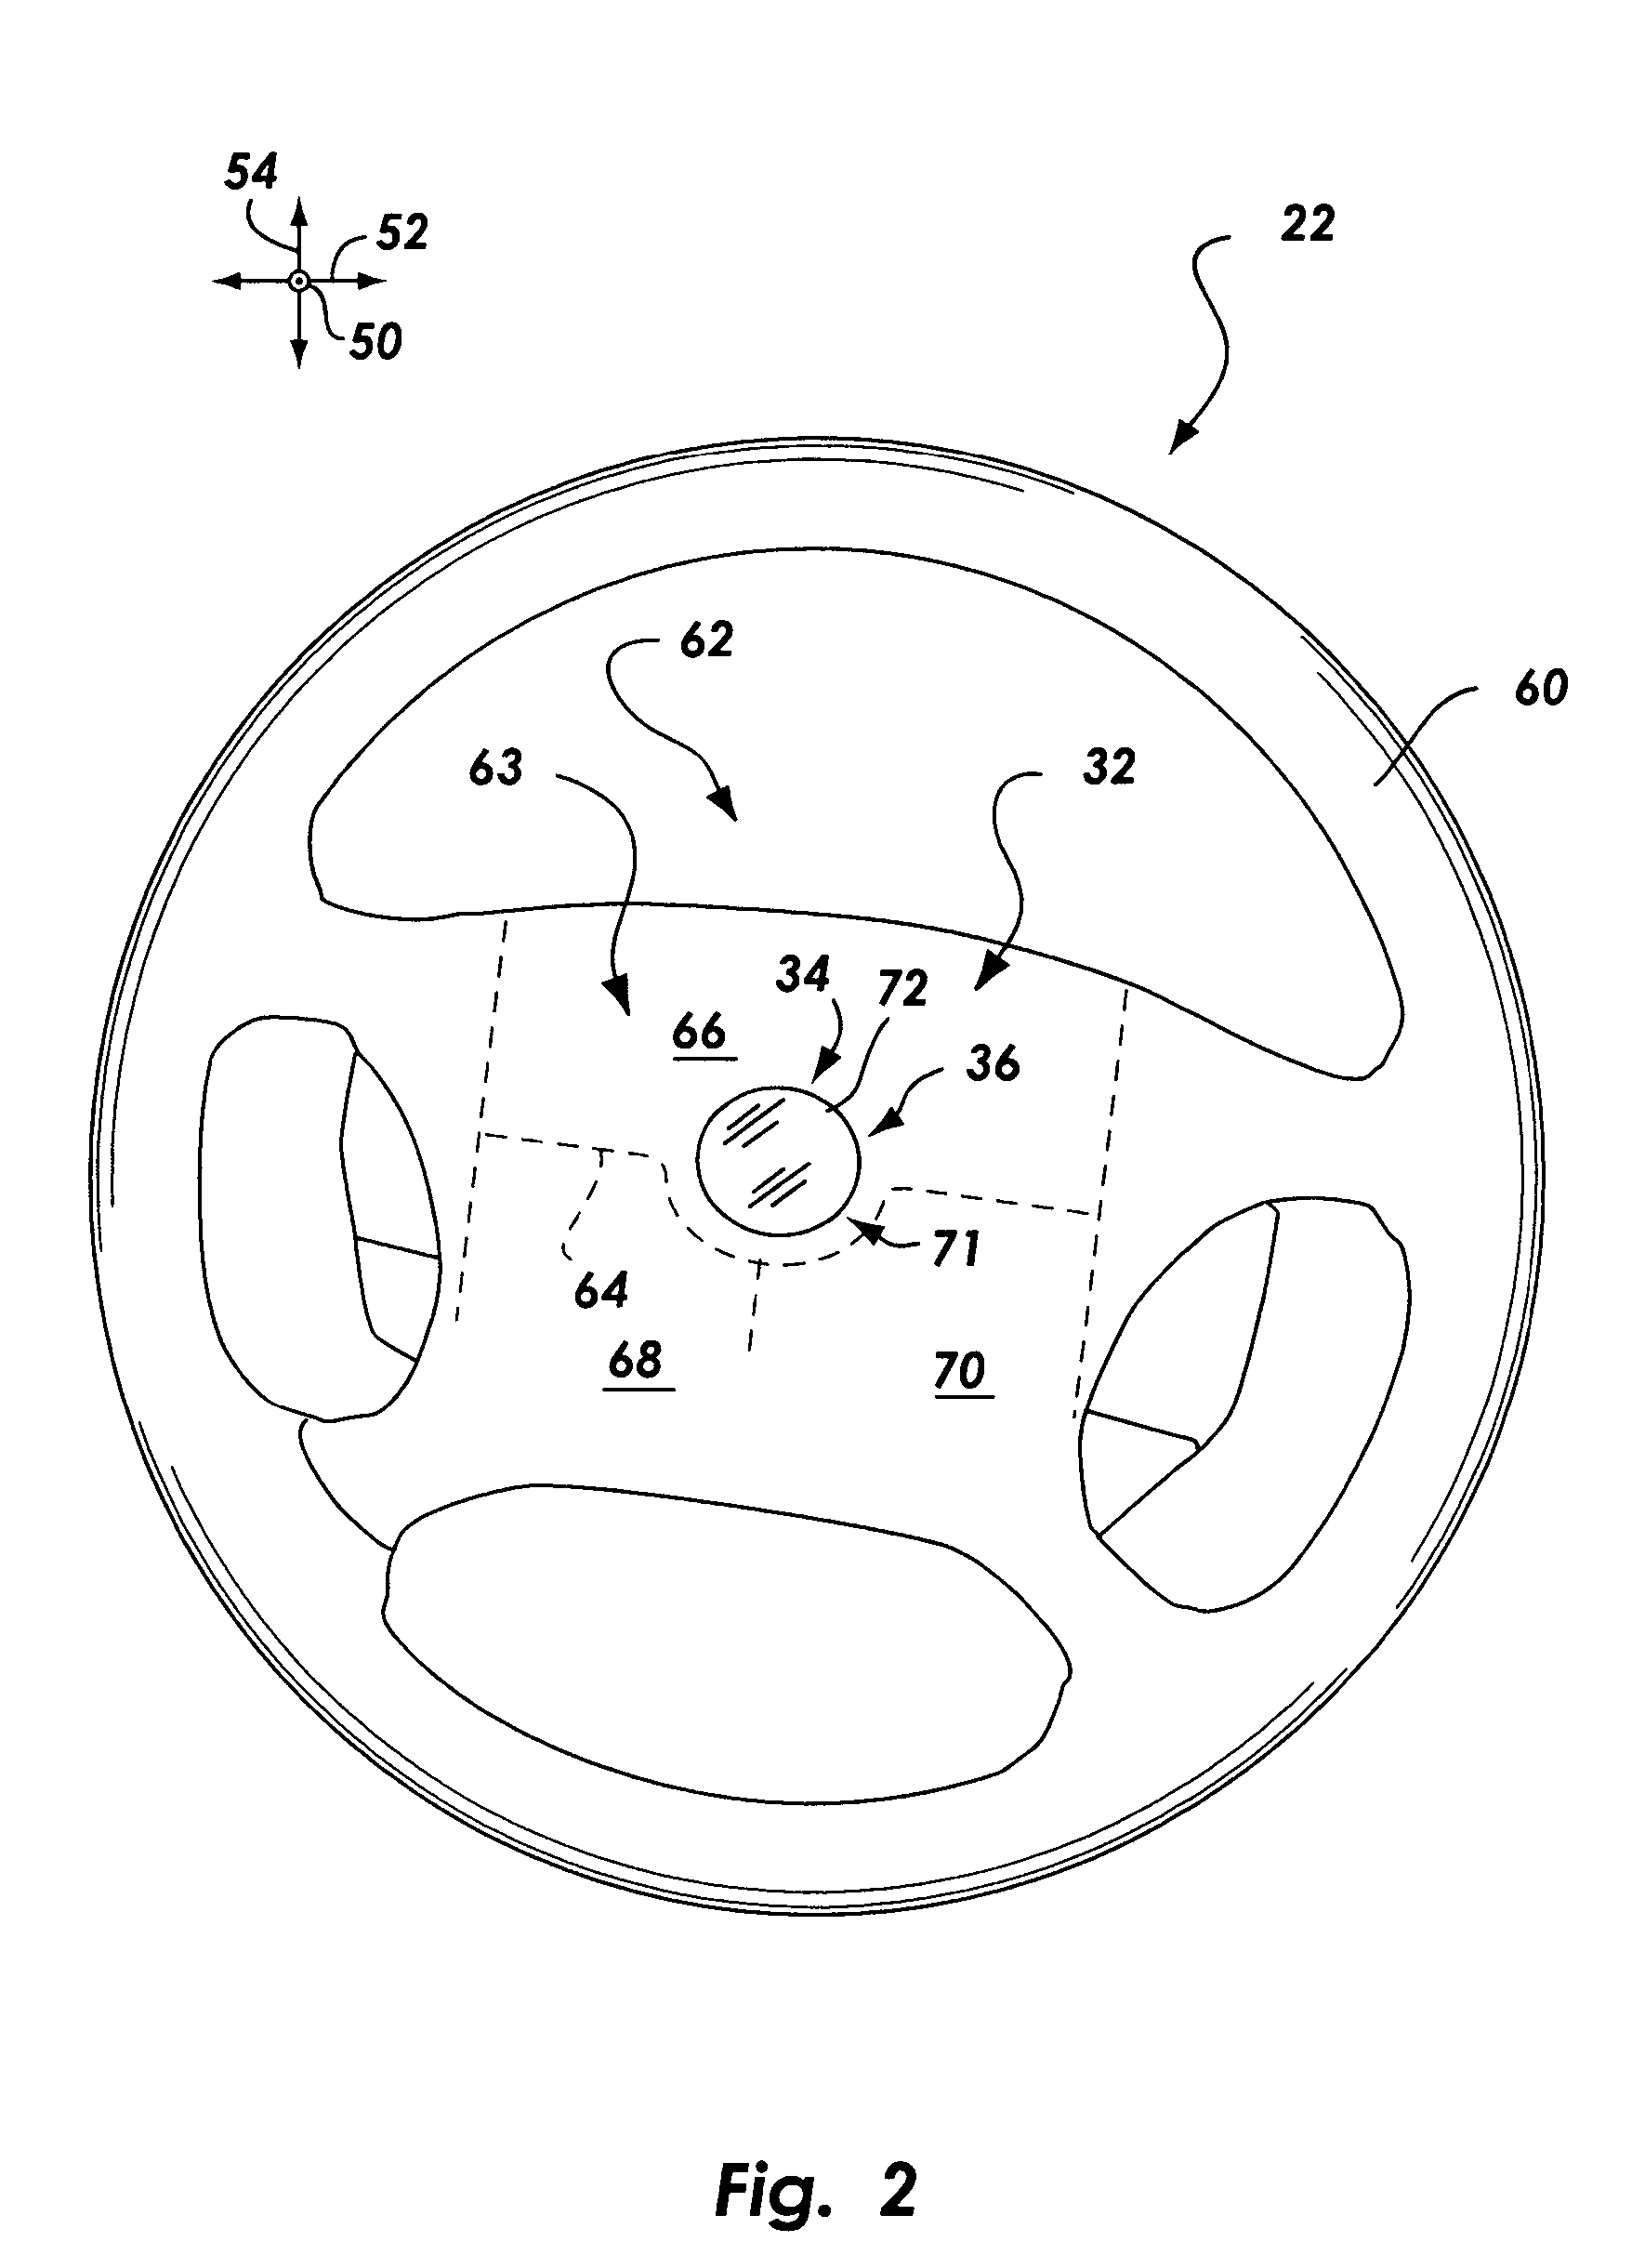 Airbag cover emblem attachment apparatus and method